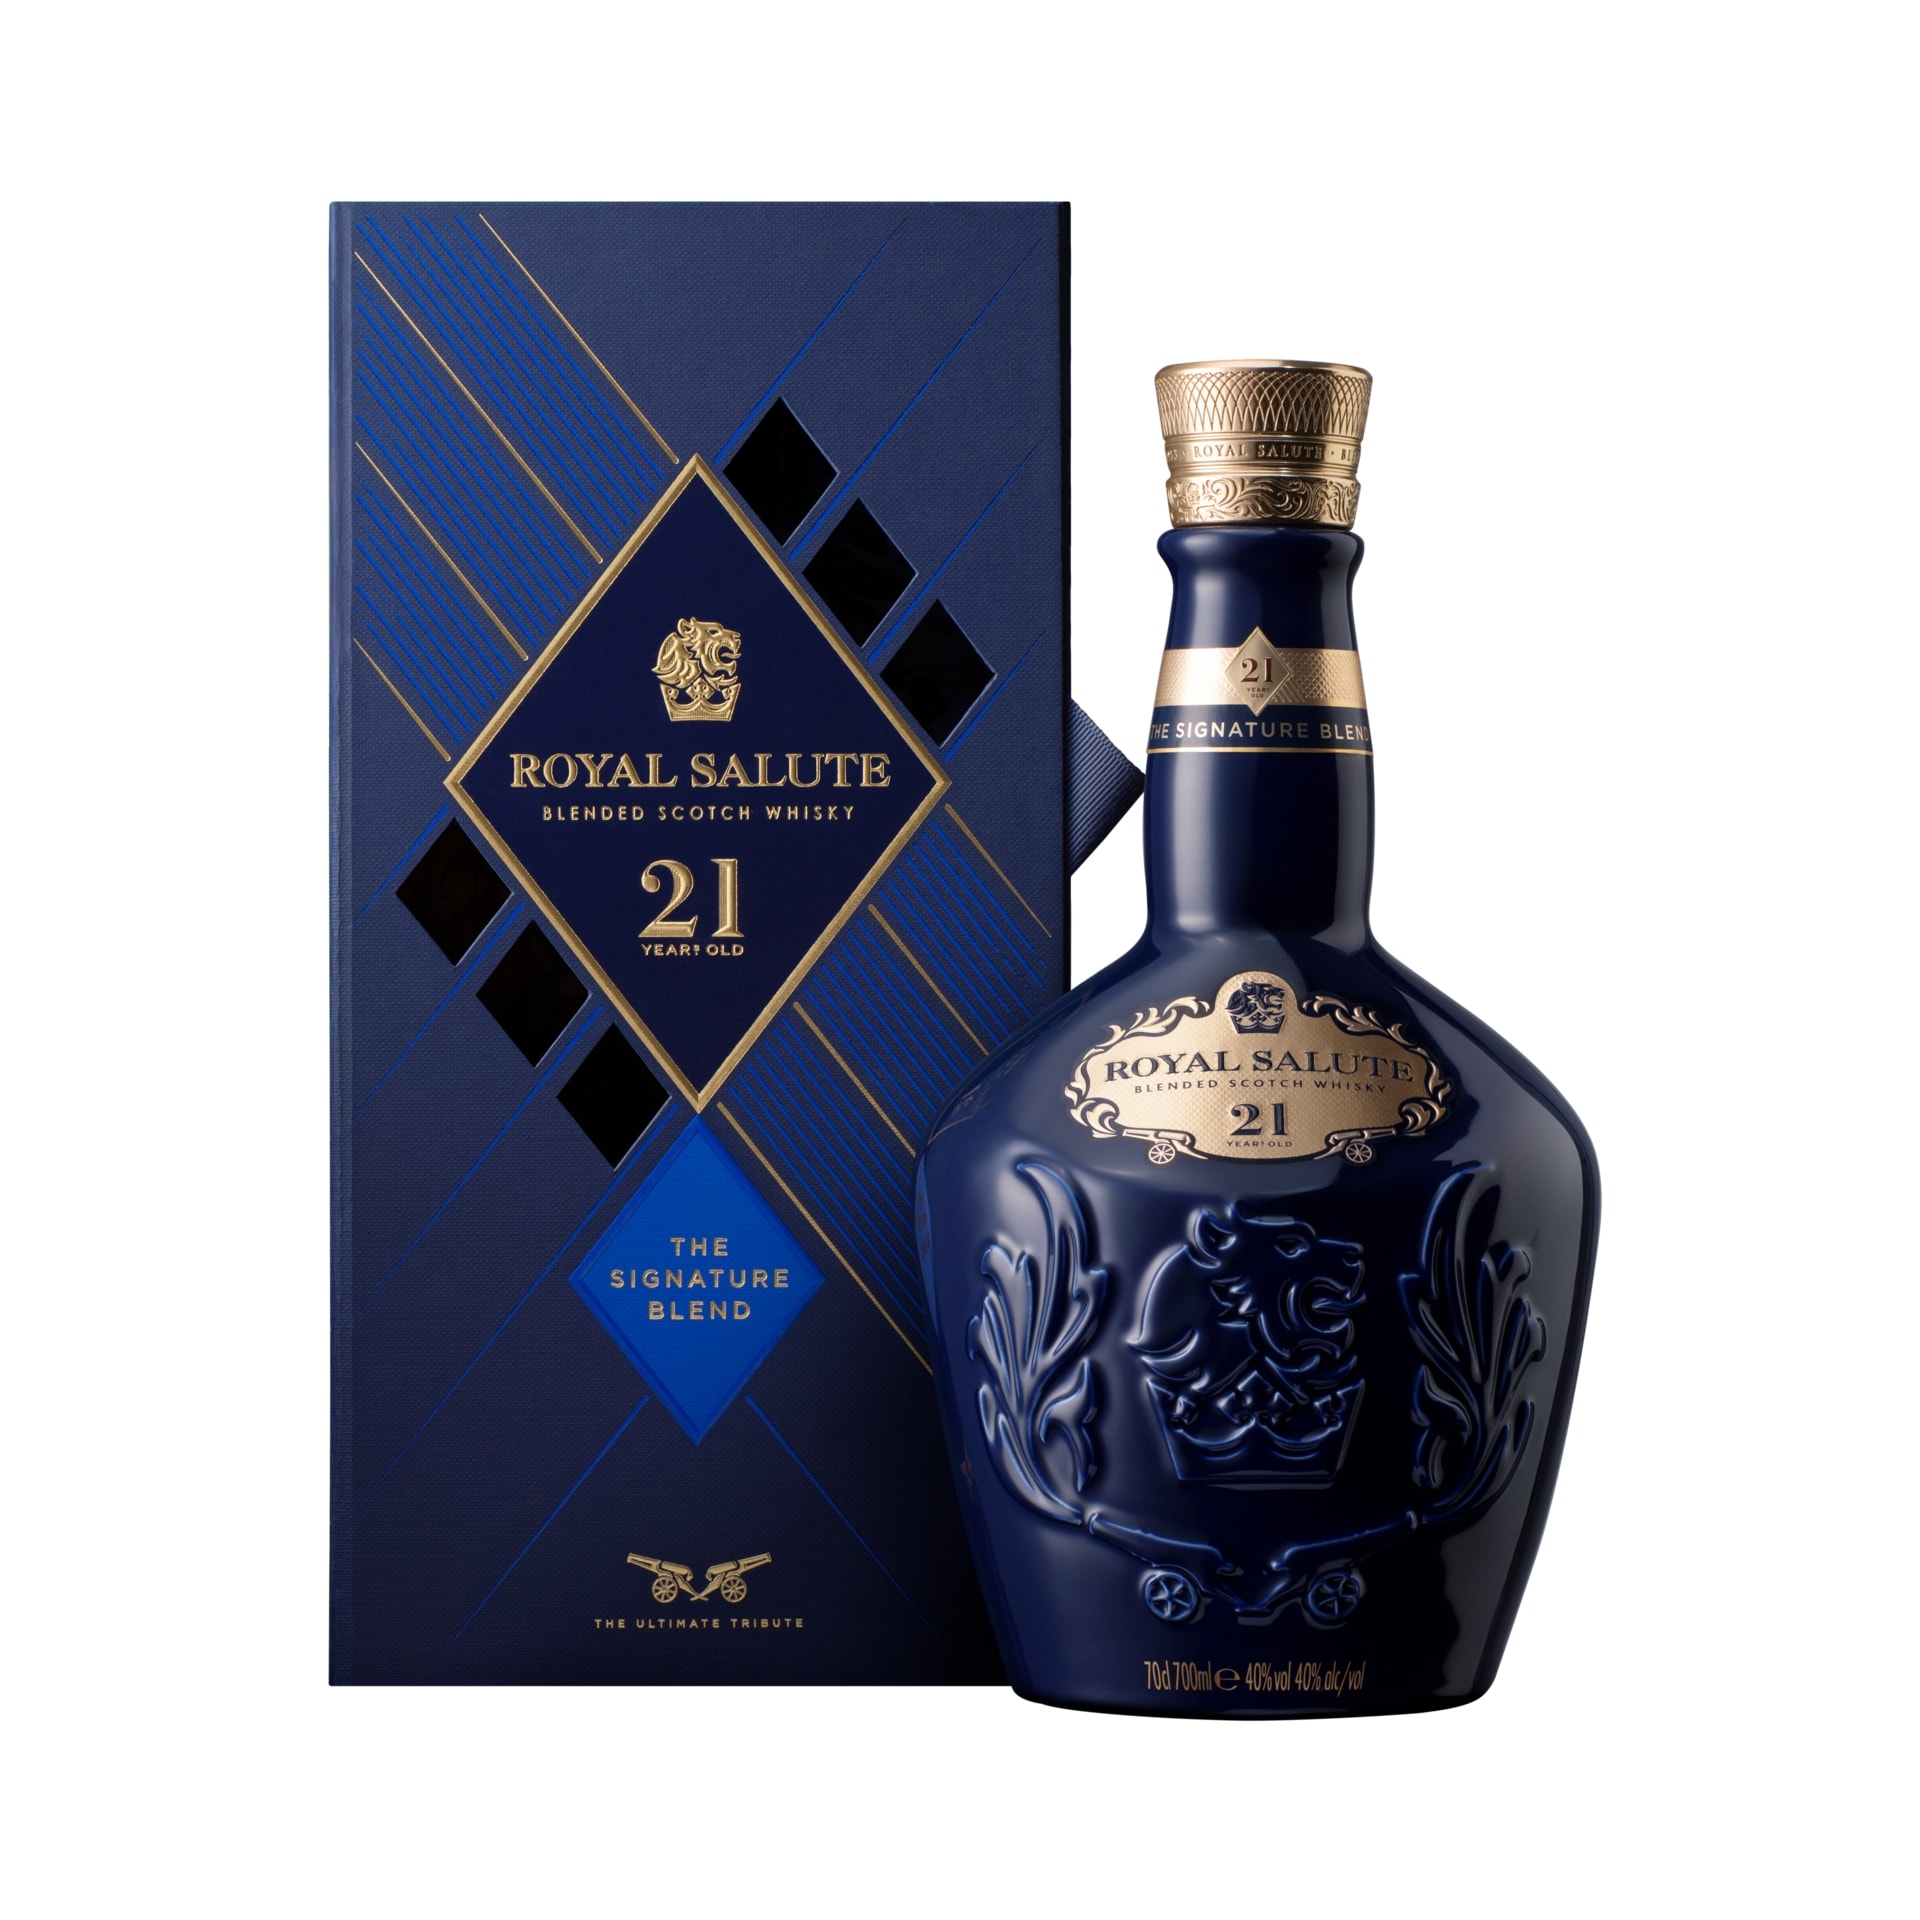 price of royal salute 21 years